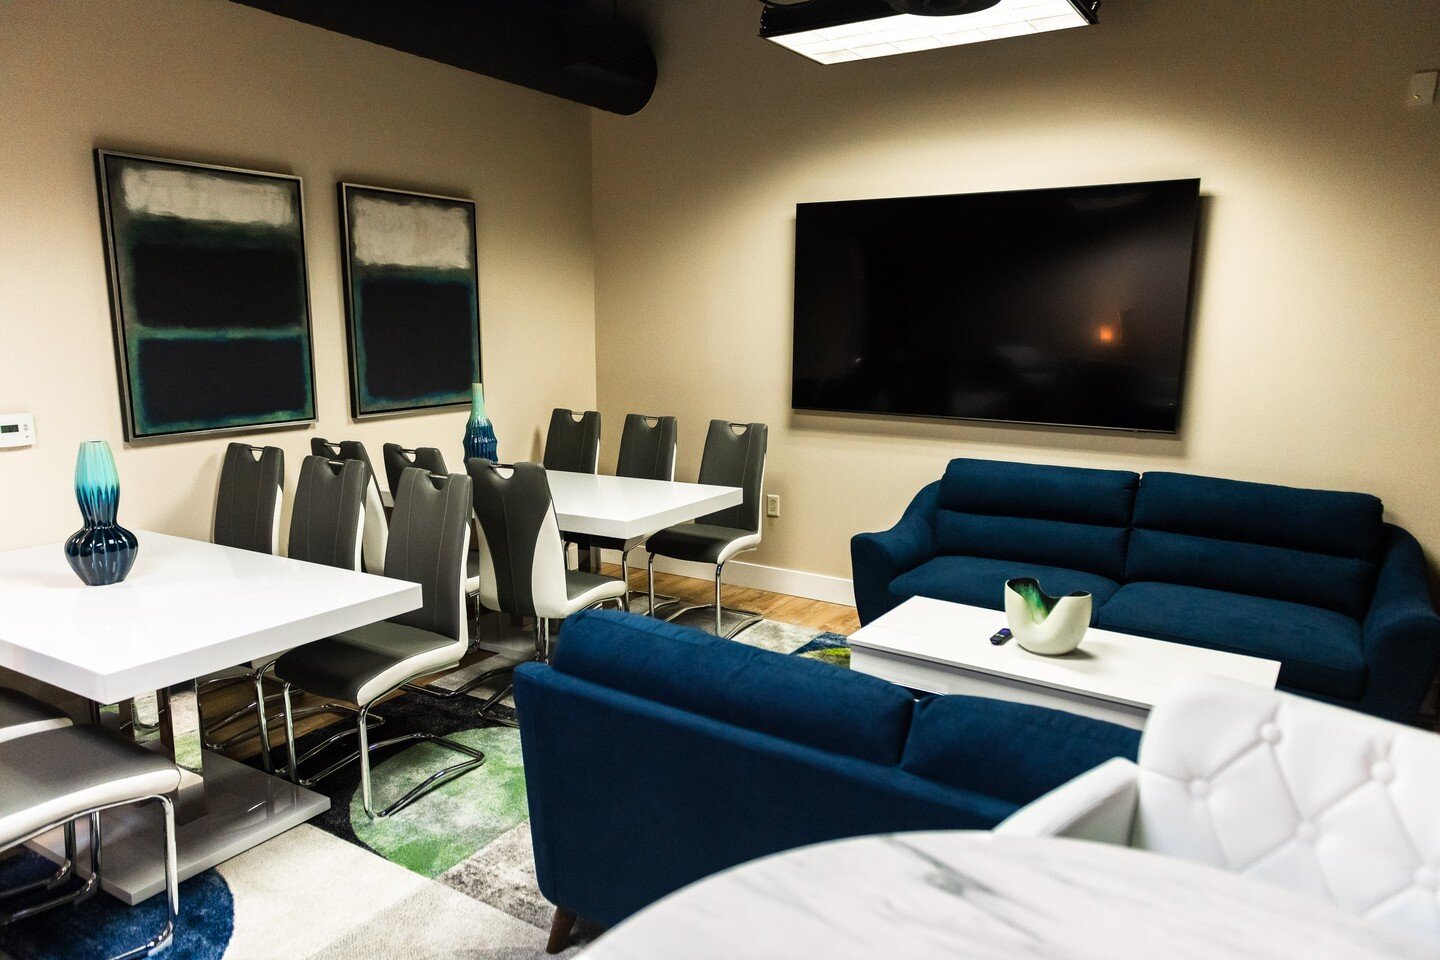 The lounge offers casual spaces that can also be ideal for small meetings. Bring your small team here to gather, meet and create.

To book the lounge, visit www.azrhlounge.com or call/text us at: 623-226-8182!

#azrhlounge #aztravellounge #travelloun